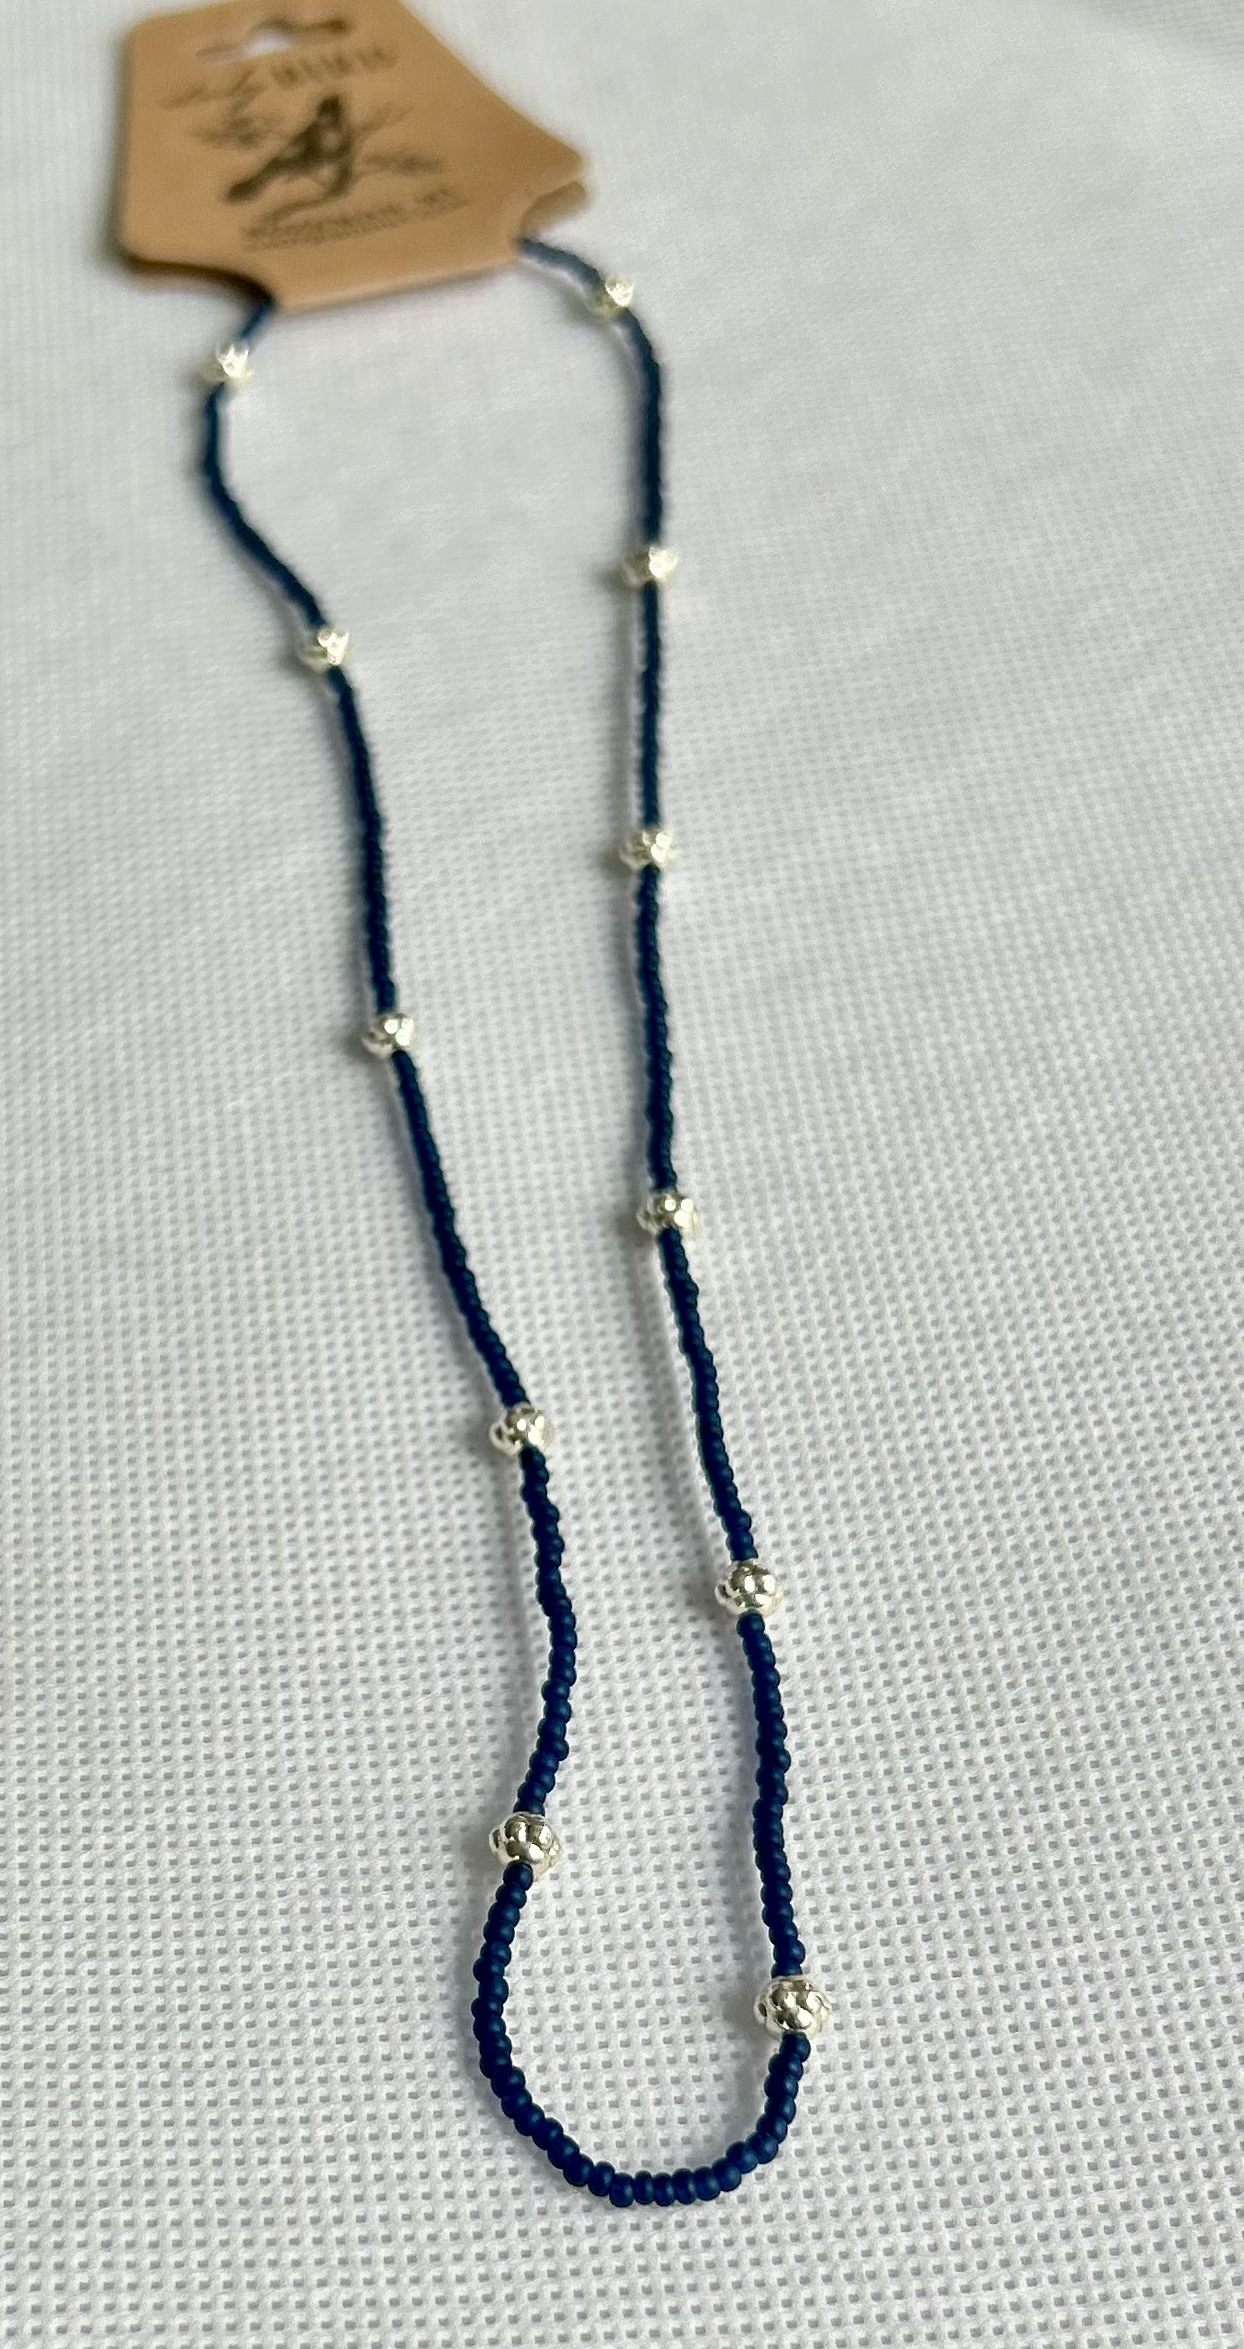 Simply Delicate Navy Blue Seed Bead Stretchy Necklace with Chunky Silver Beads